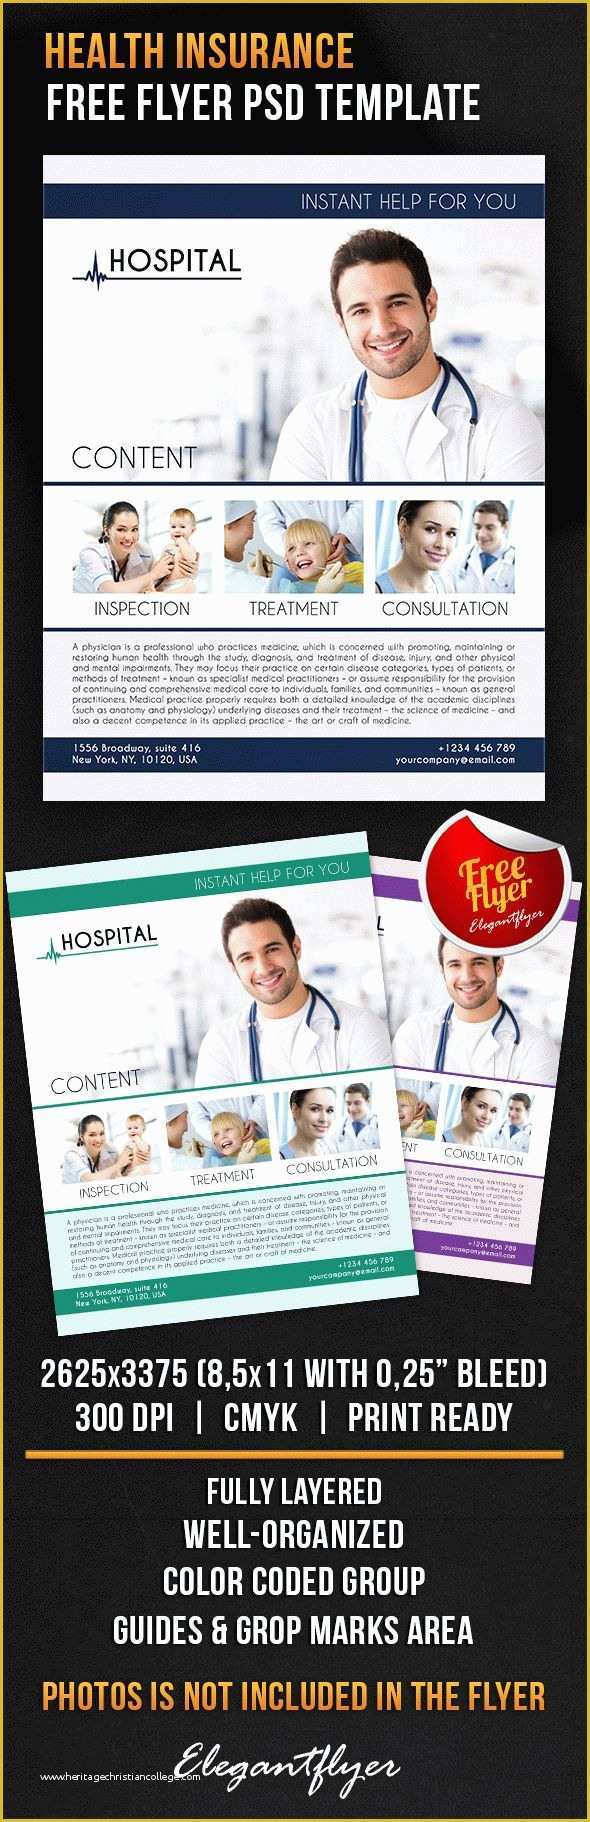 Insurance Flyer Templates Free Of Health Insurance – Free Flyer Psd Template – by Elegantflyer